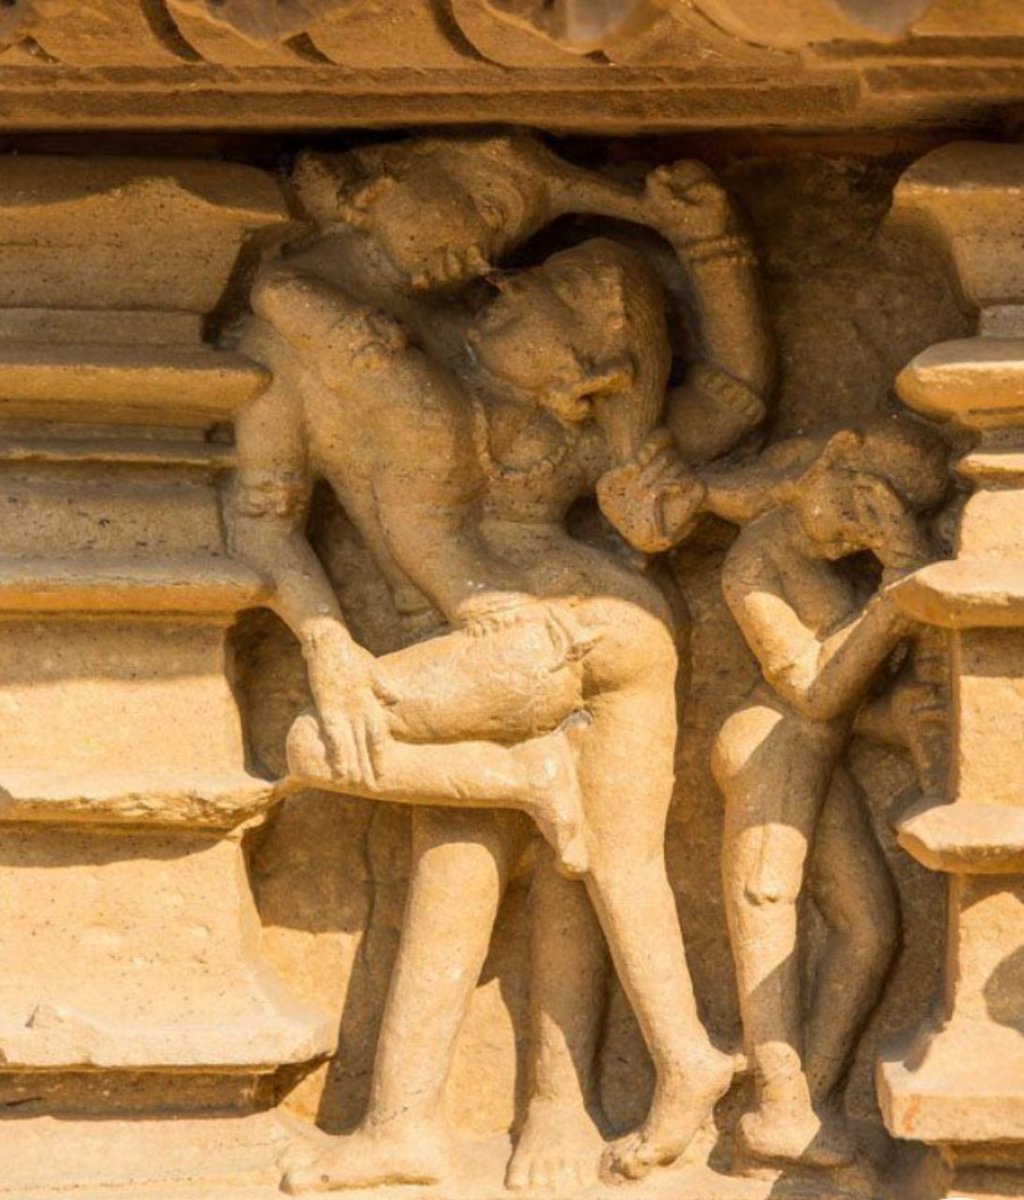 The beginning of the Chandela dynasty is believed to have originated from Lord Chandradeva. In ancient times, his son established the Jejakbhukti or Bundelkhand with his inspiration. The display of Kaam art at the temple of Khajuraho is world famous.